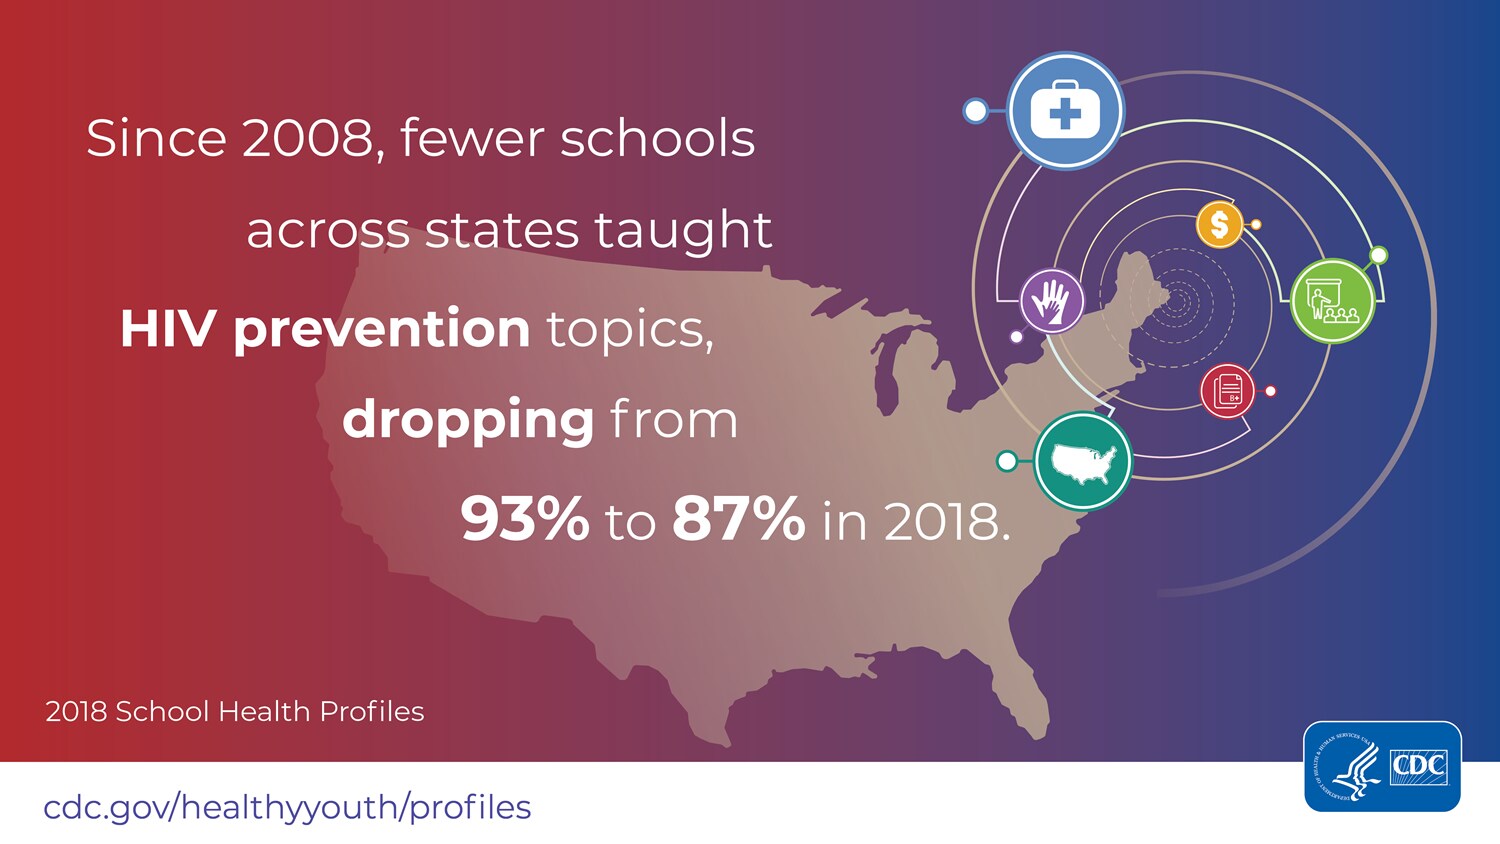 2018 School Health Profiles Infographic: Since 2008, fewer schools across states taught HIV prevention topics, dropping from 93% to 87% in 2018.